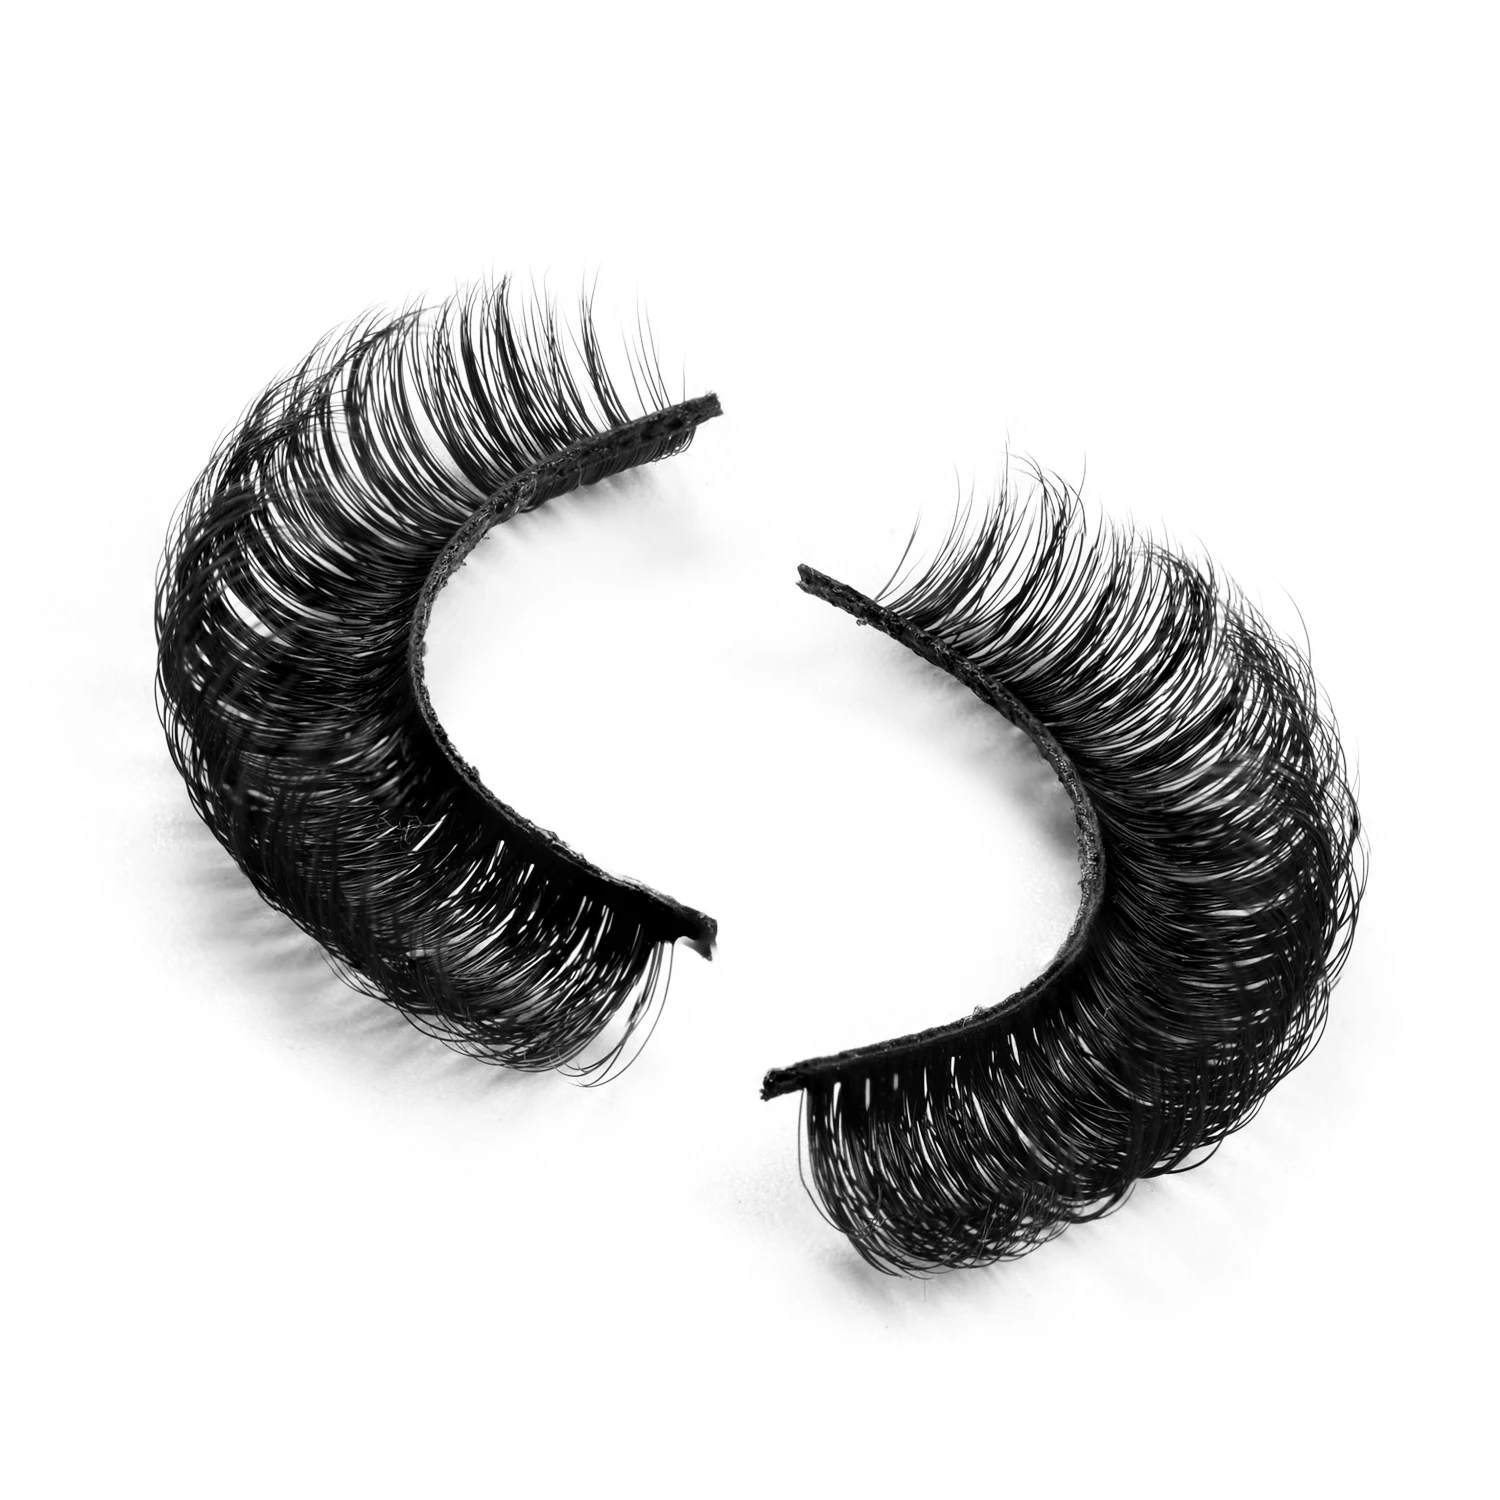 

Hot selling faux mink Russian strip lashes vegan D curl wink winged eyelash extensions extra curly C D curl lash strip